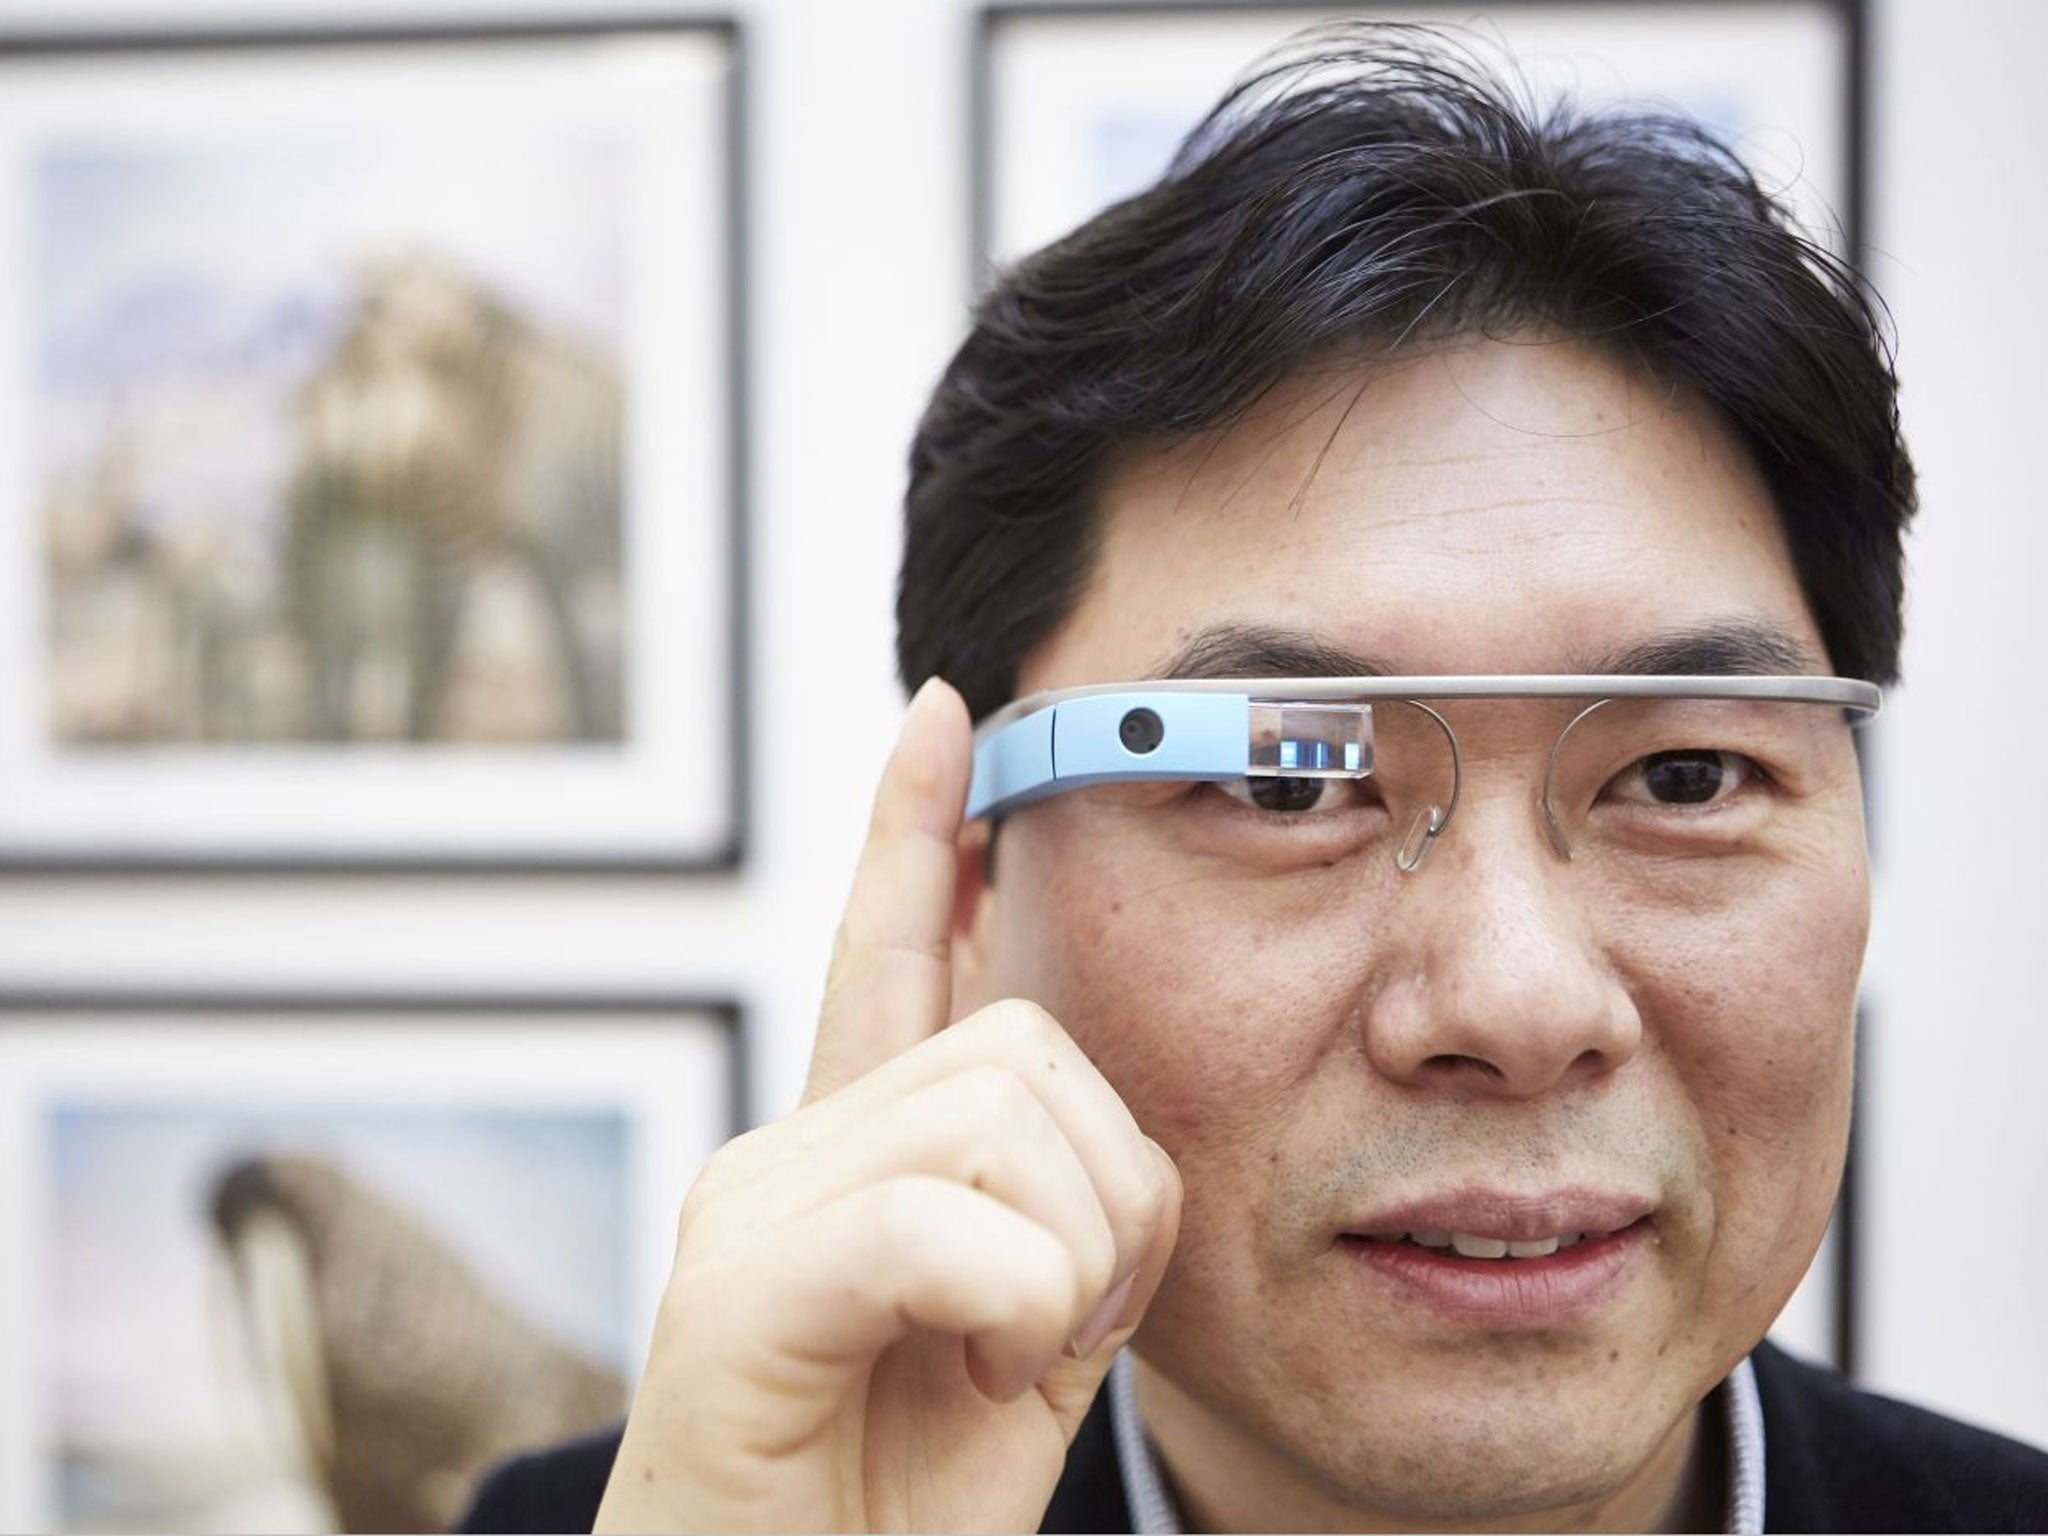 How Google Glass could change we view | The Independent | The Independent